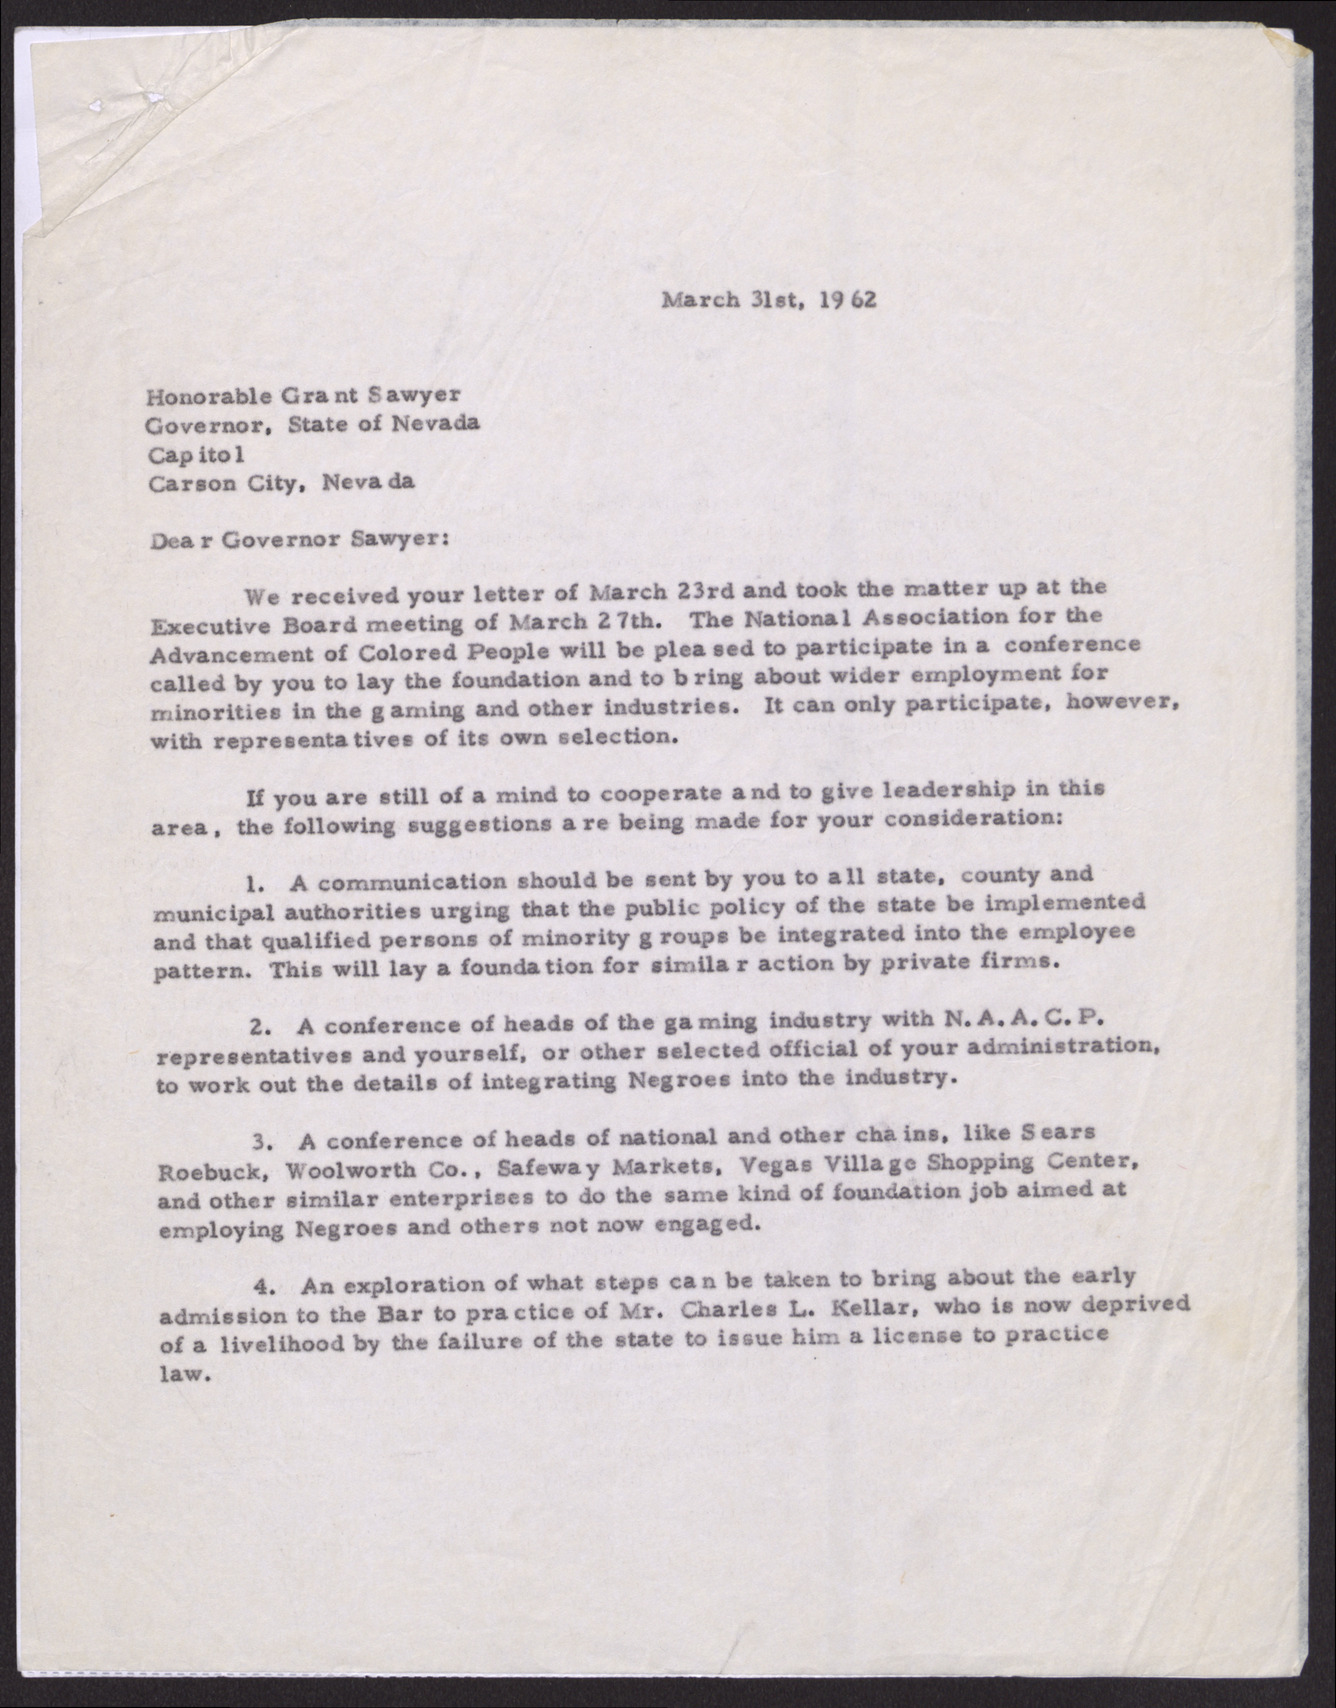 Letter to Honorable Grant Sawyer from Rev. Donald M. Clark (2 pages), March 31, 1962